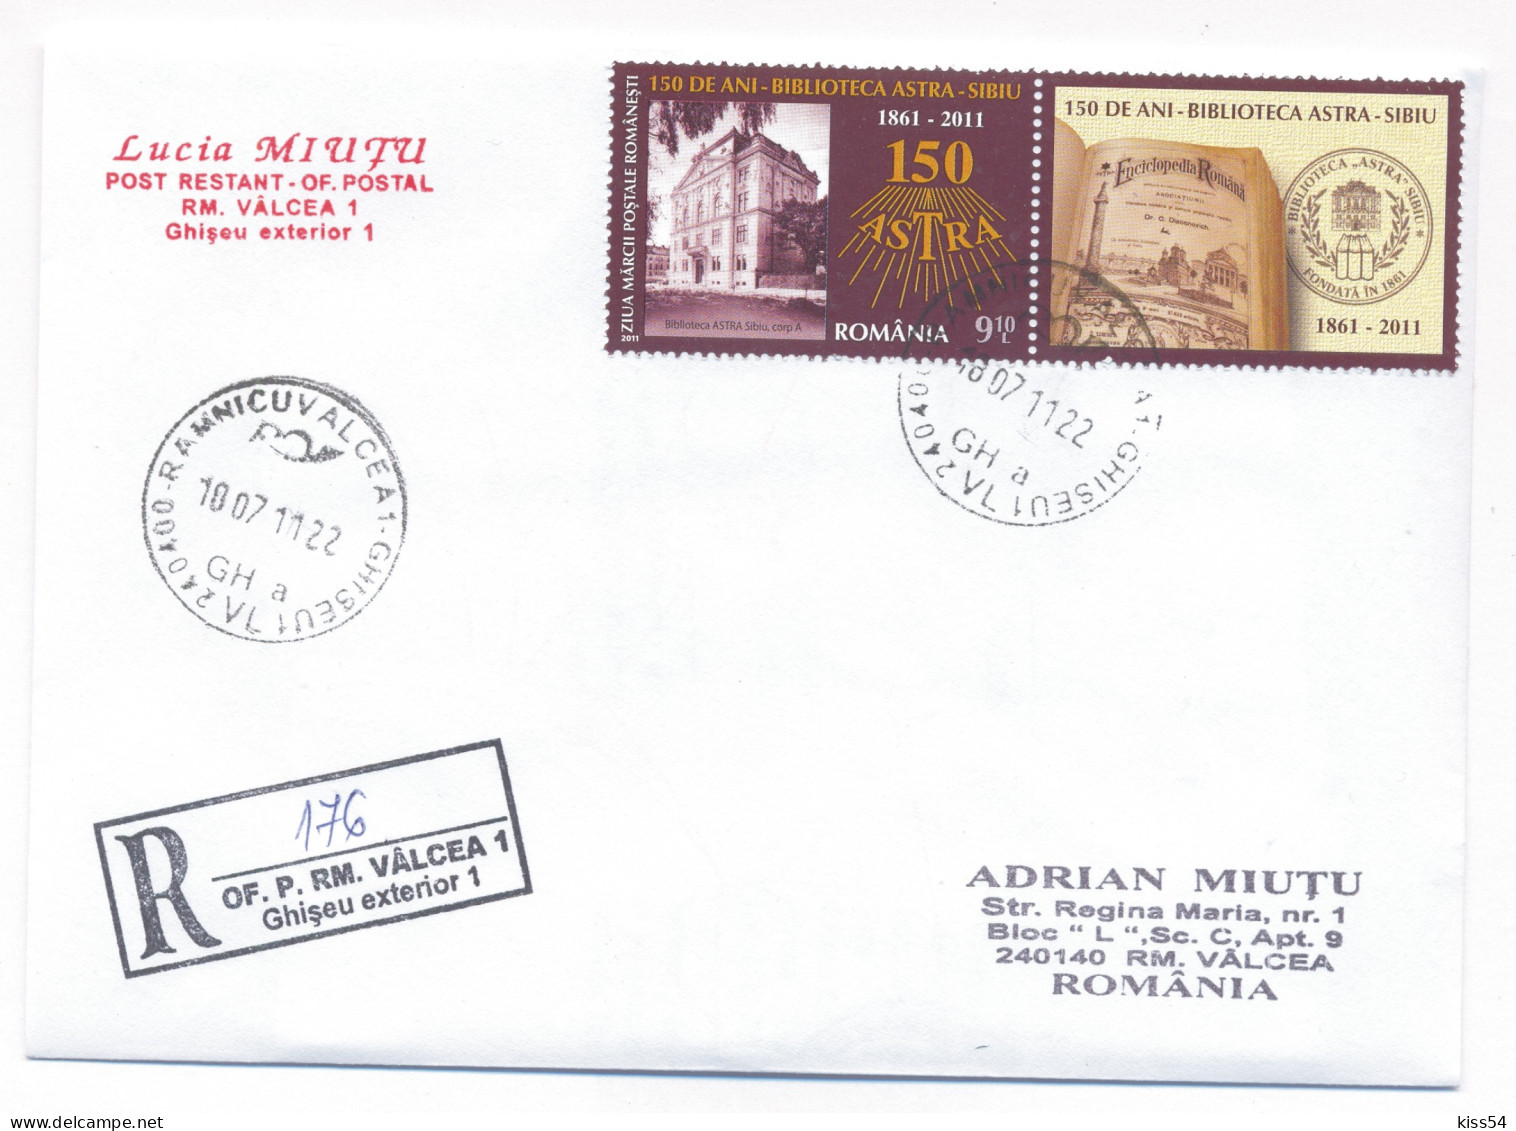 CP 16 - 176-a ASTRA LIBRARY, Sibiu, Romania, 150 Years - Registered, Stamp With Vignette - 2011 - Covers & Documents